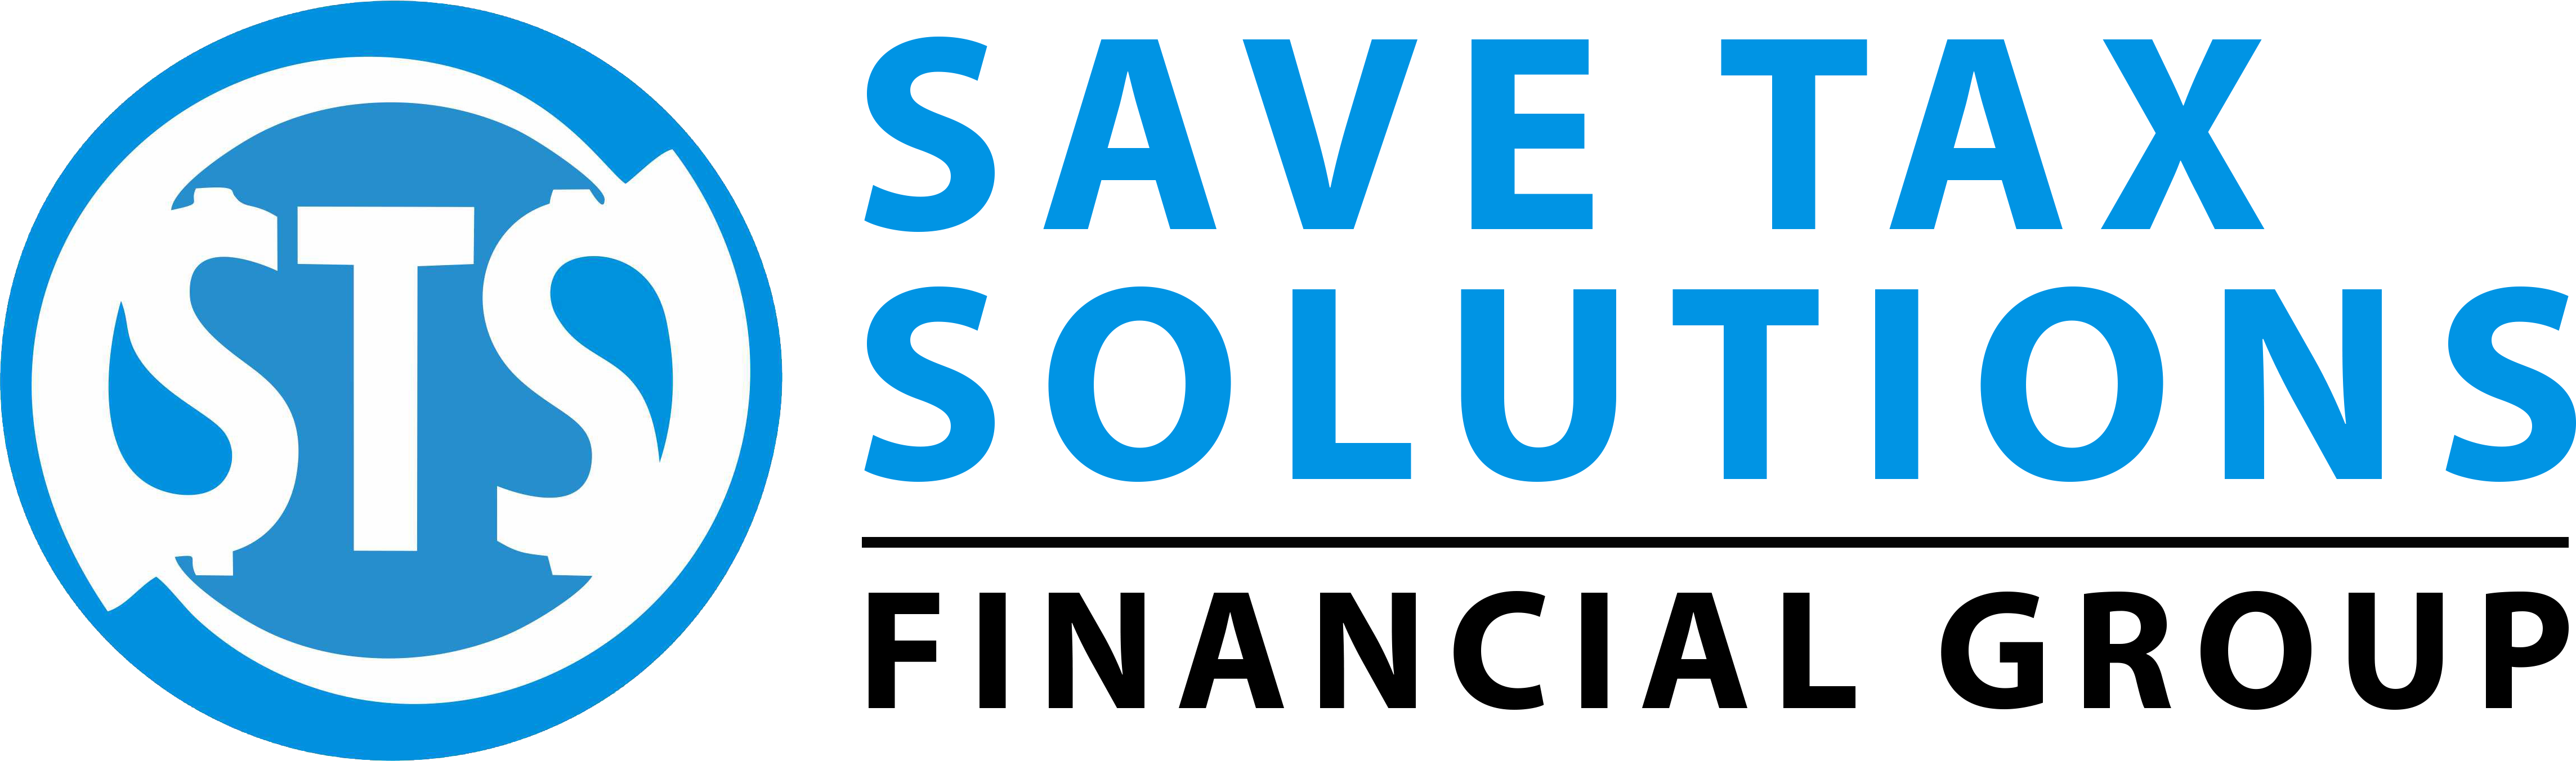 Save Tax Solutions